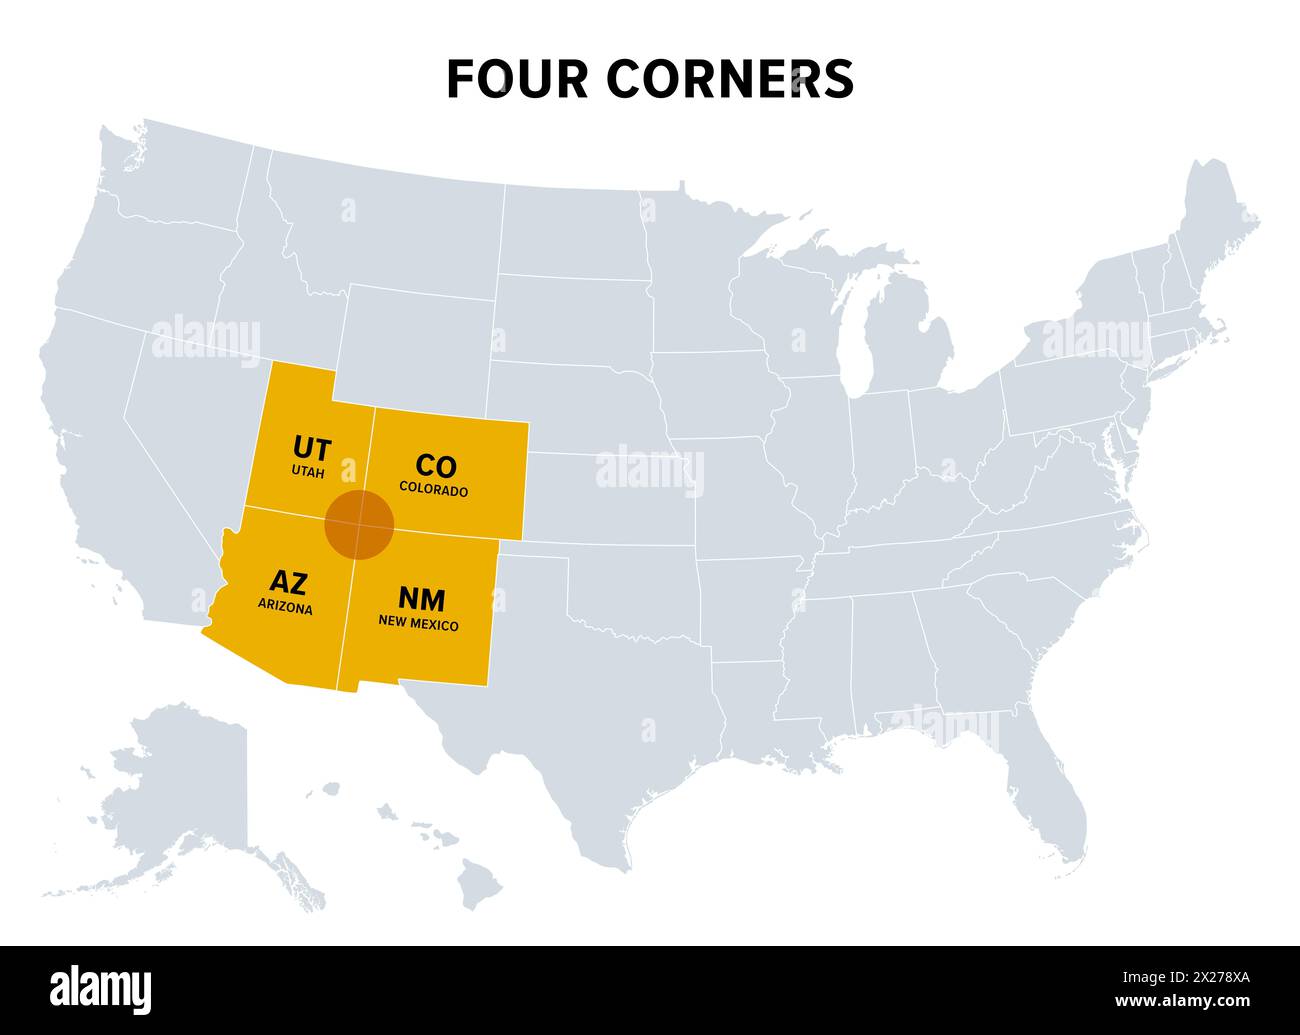 Four Corners, a region of the Southwestern United States, political map. Only region in the United states where four states share a boundary point. Stock Photo